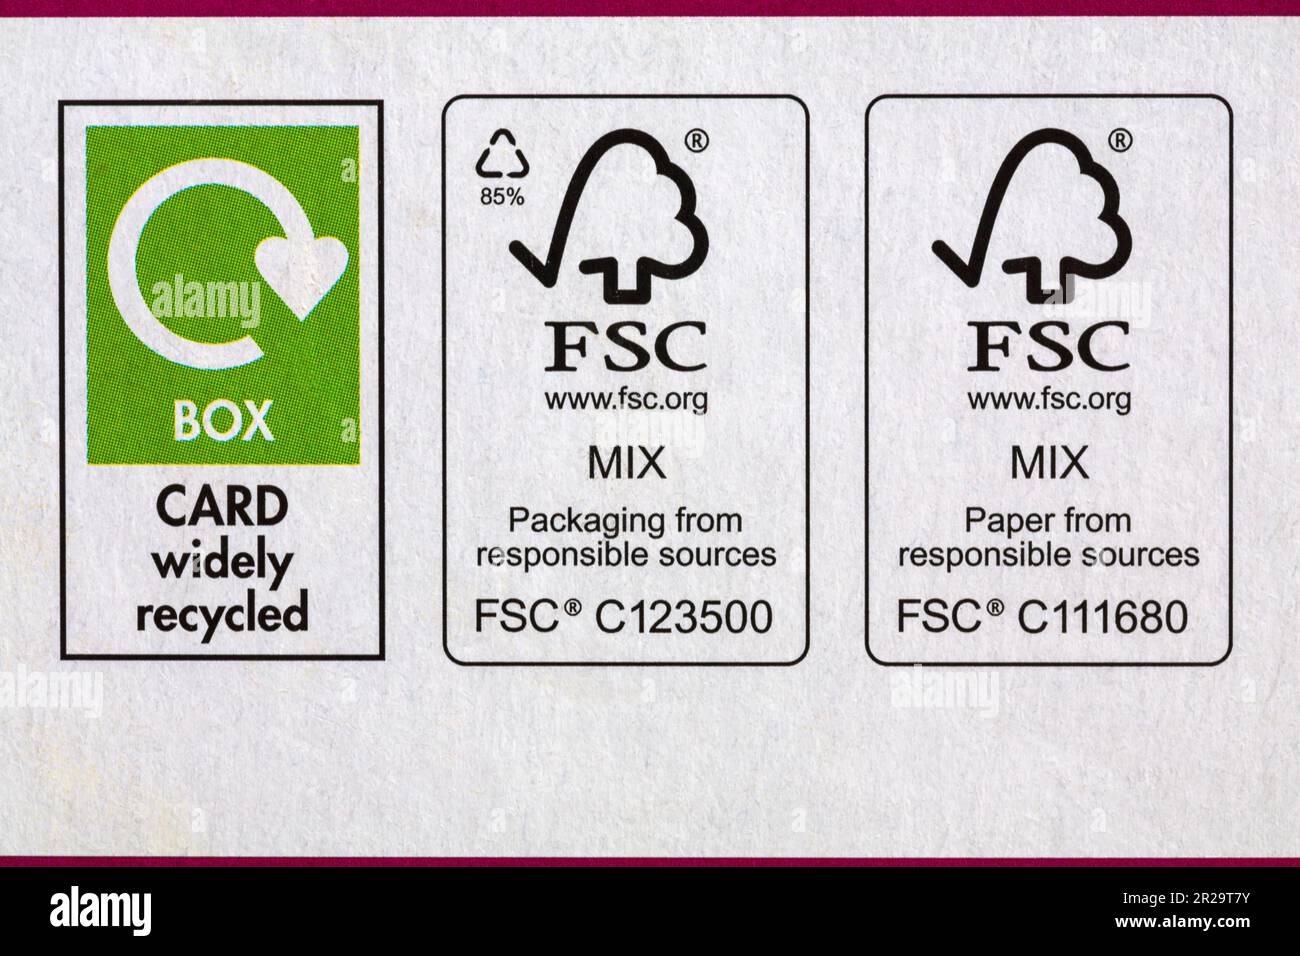 Recycle information, recycling information, disposal instructions on box of greaseproof & baking paper by Sainsburys - recycling recycle logo symbol Stock Photo